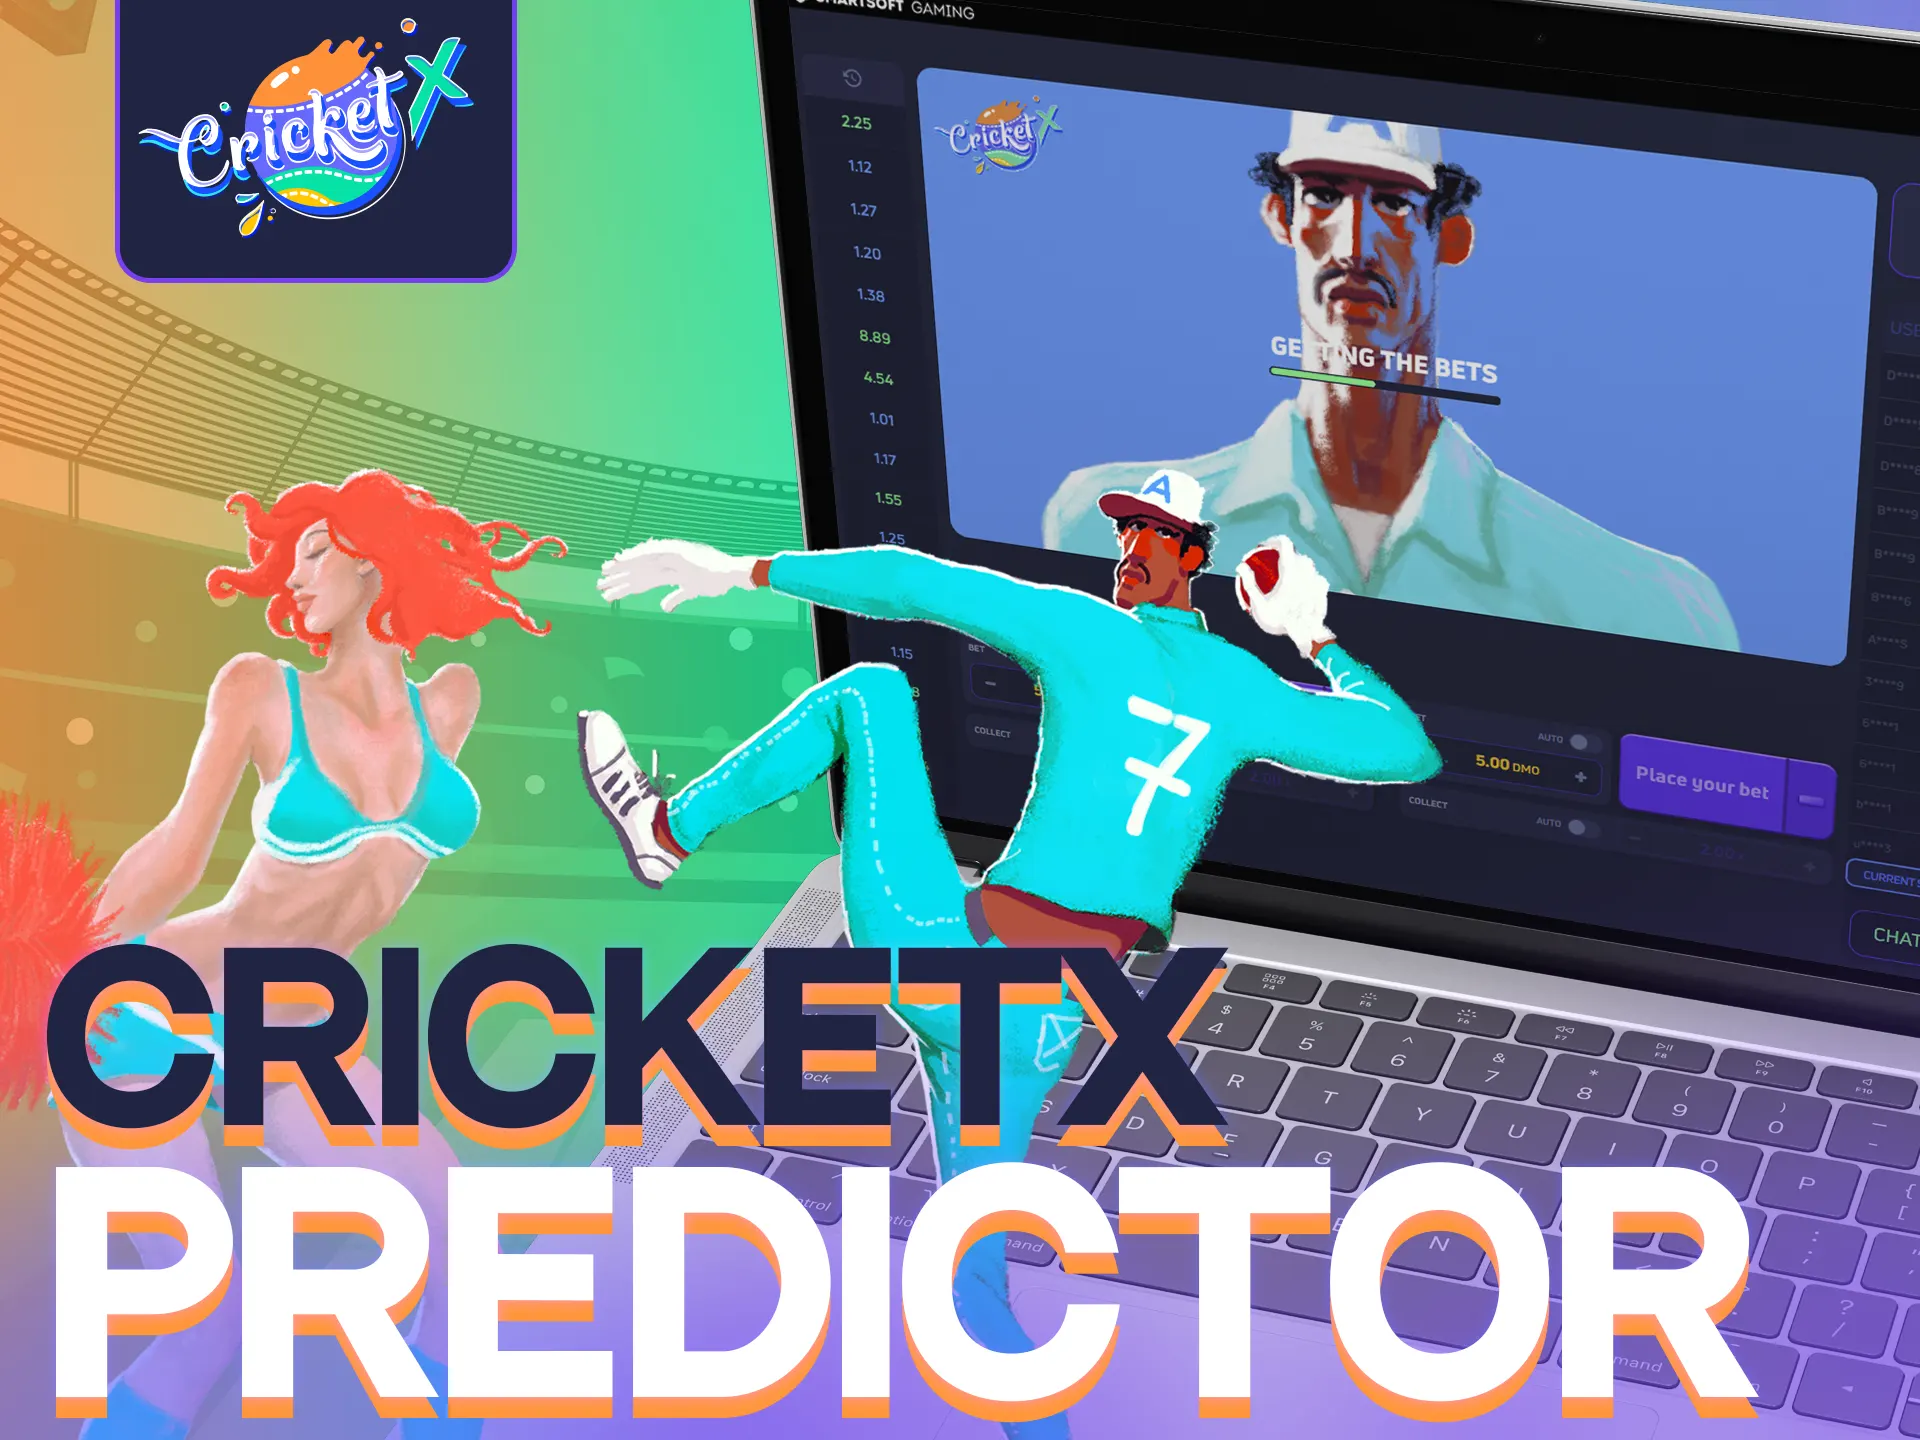 It is not possible to determine the results of a Cricket-X game in advance.